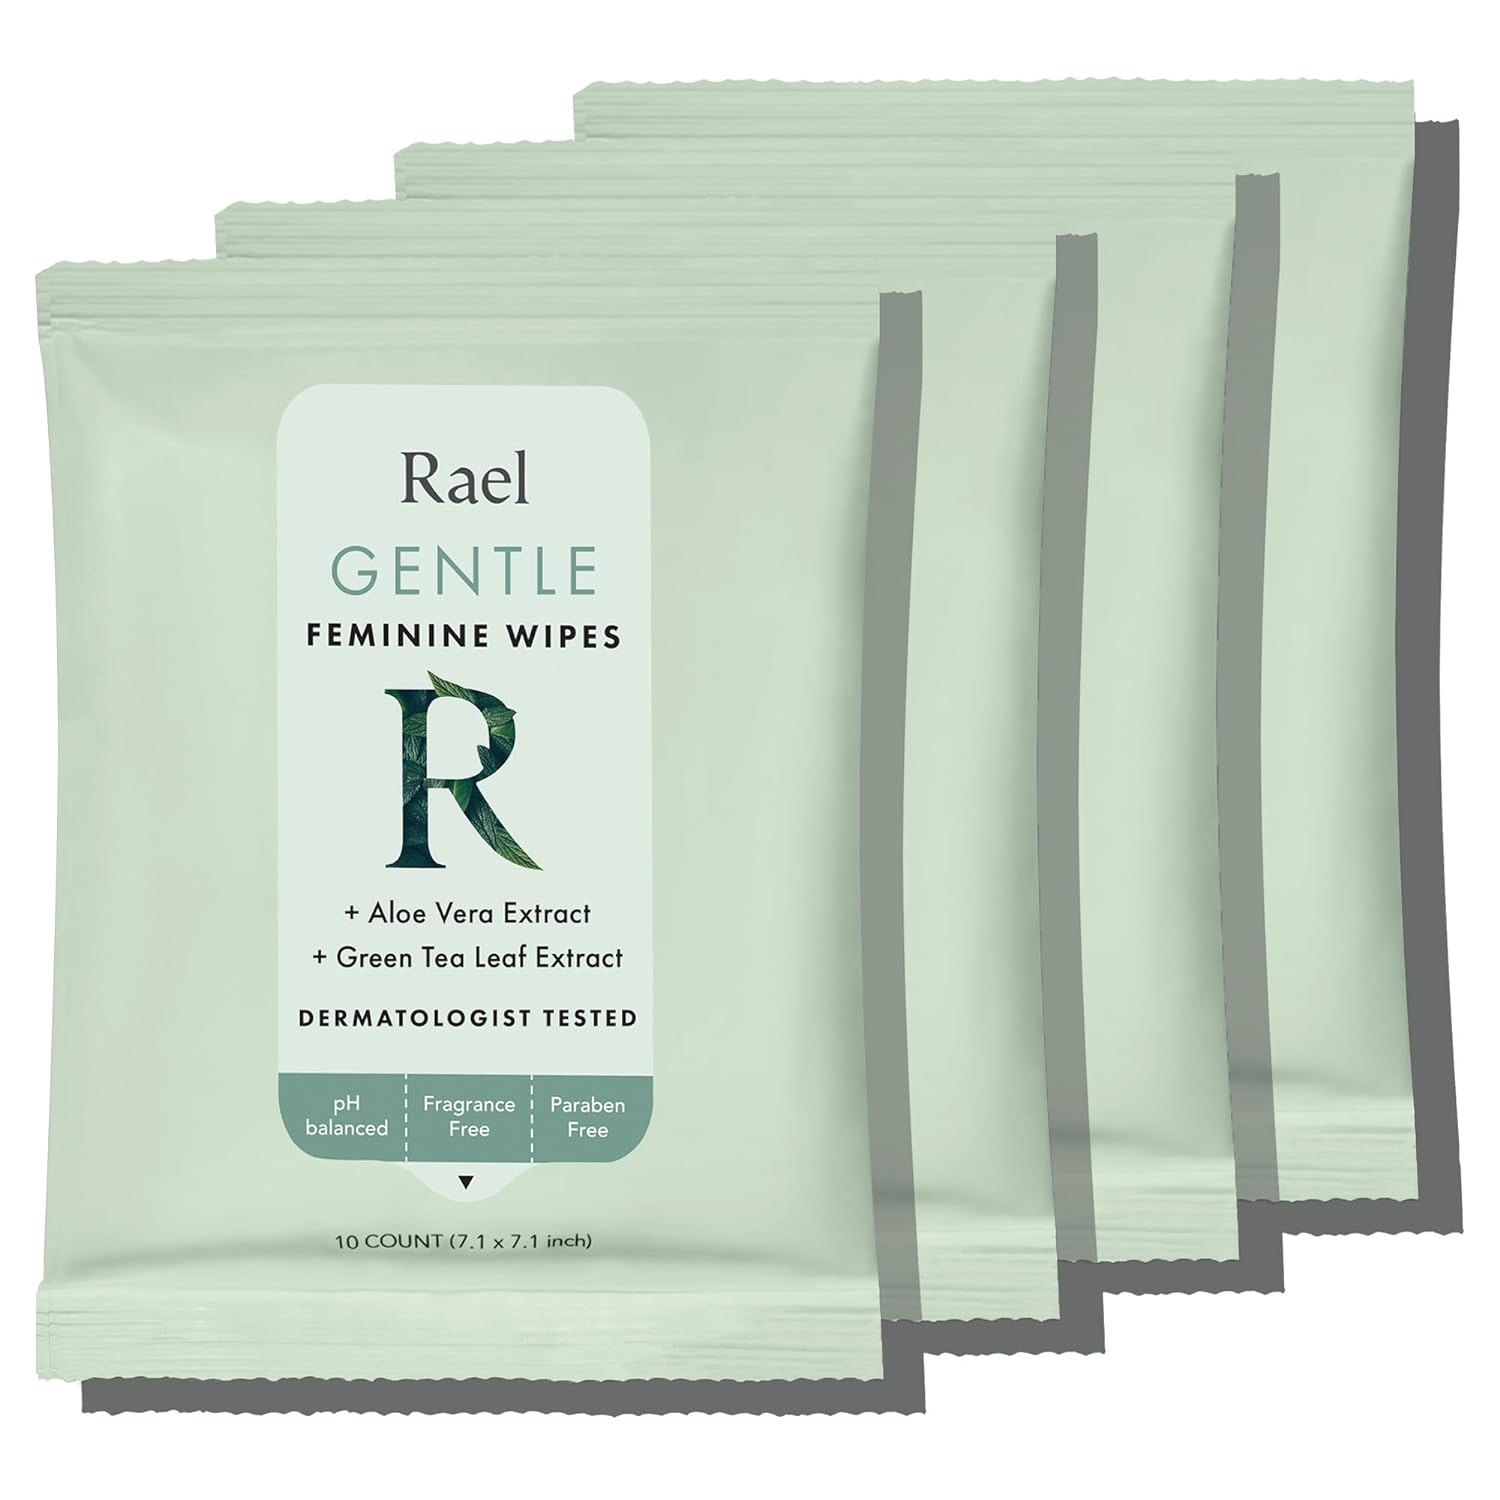 Rael Feminine Wipes, Flushable Wipes pH Balanced - Travel Size, All Skin Types, Paraben Free, Daily Use (10 Count, Pack of 4)